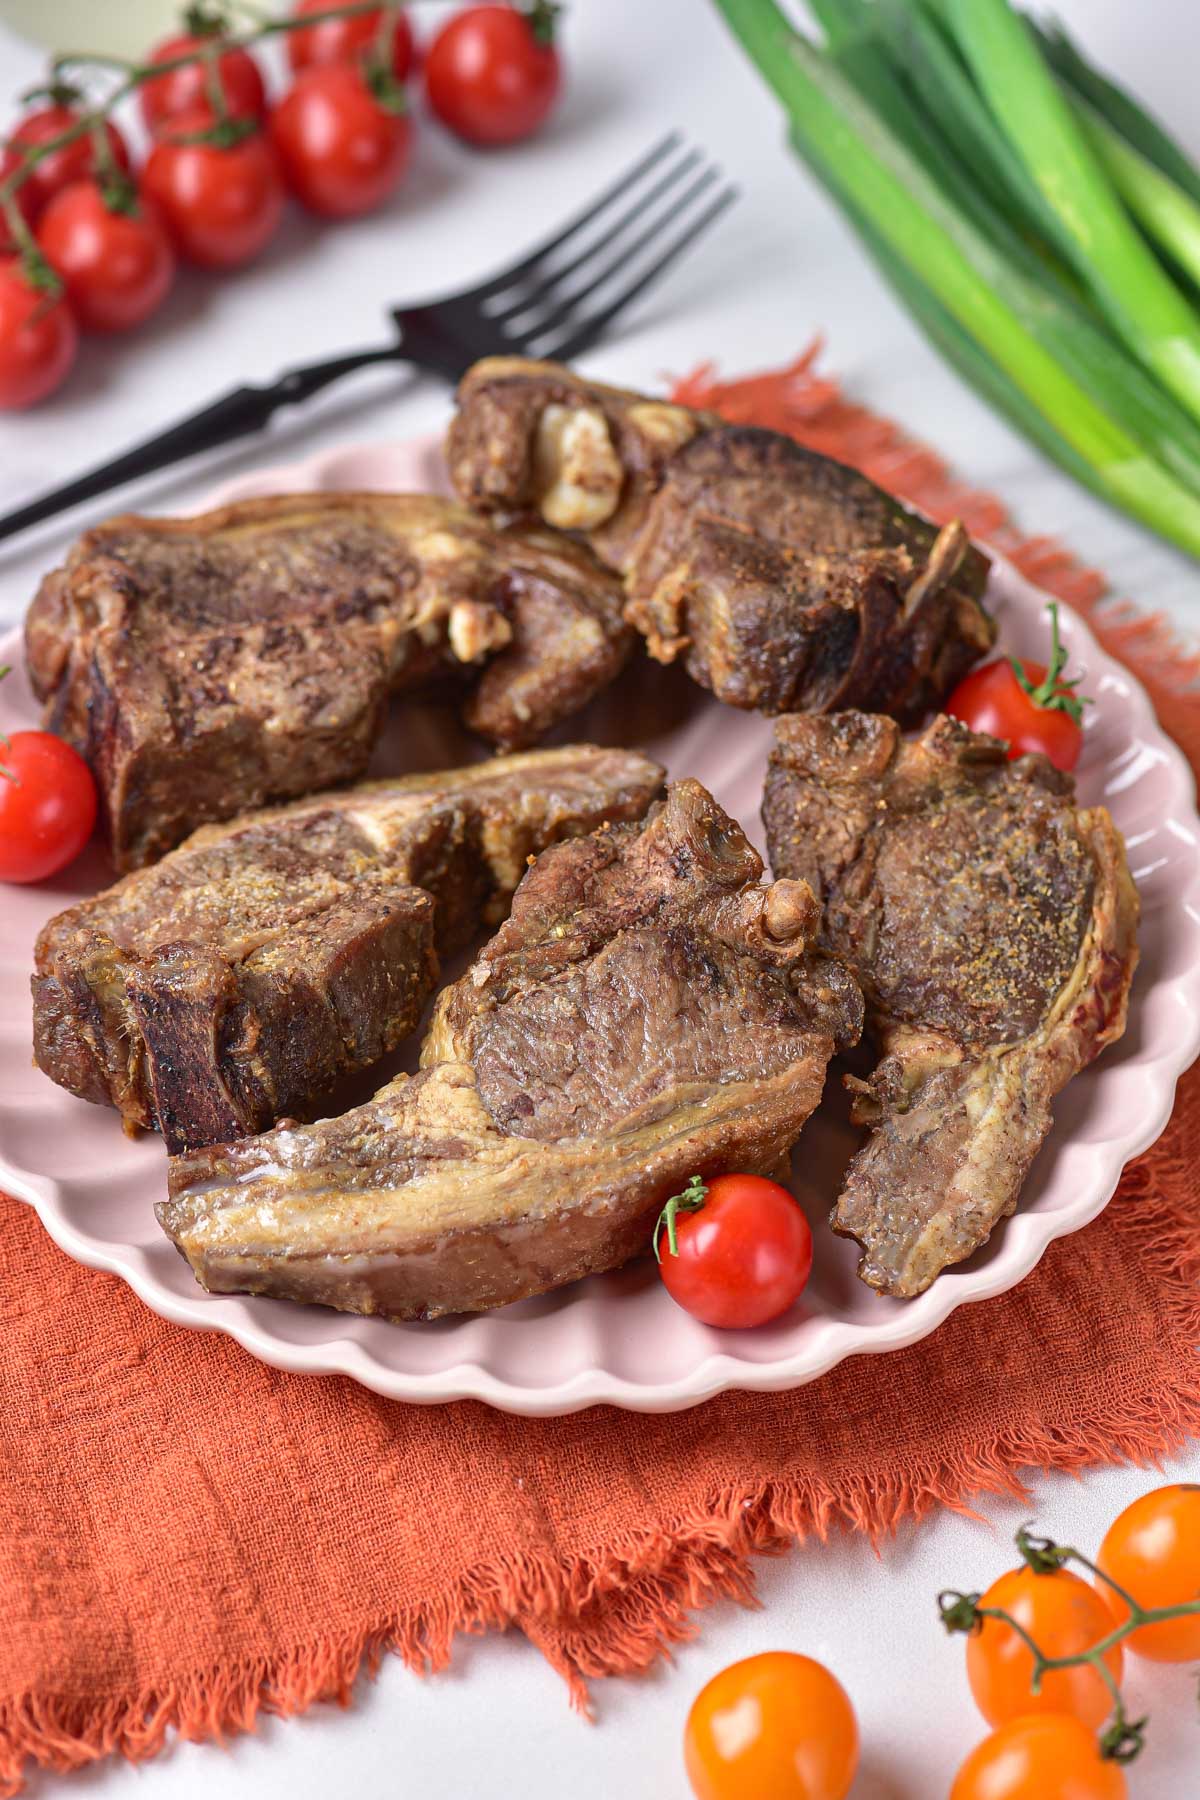 A plate of cooked lamb chops ready to serve